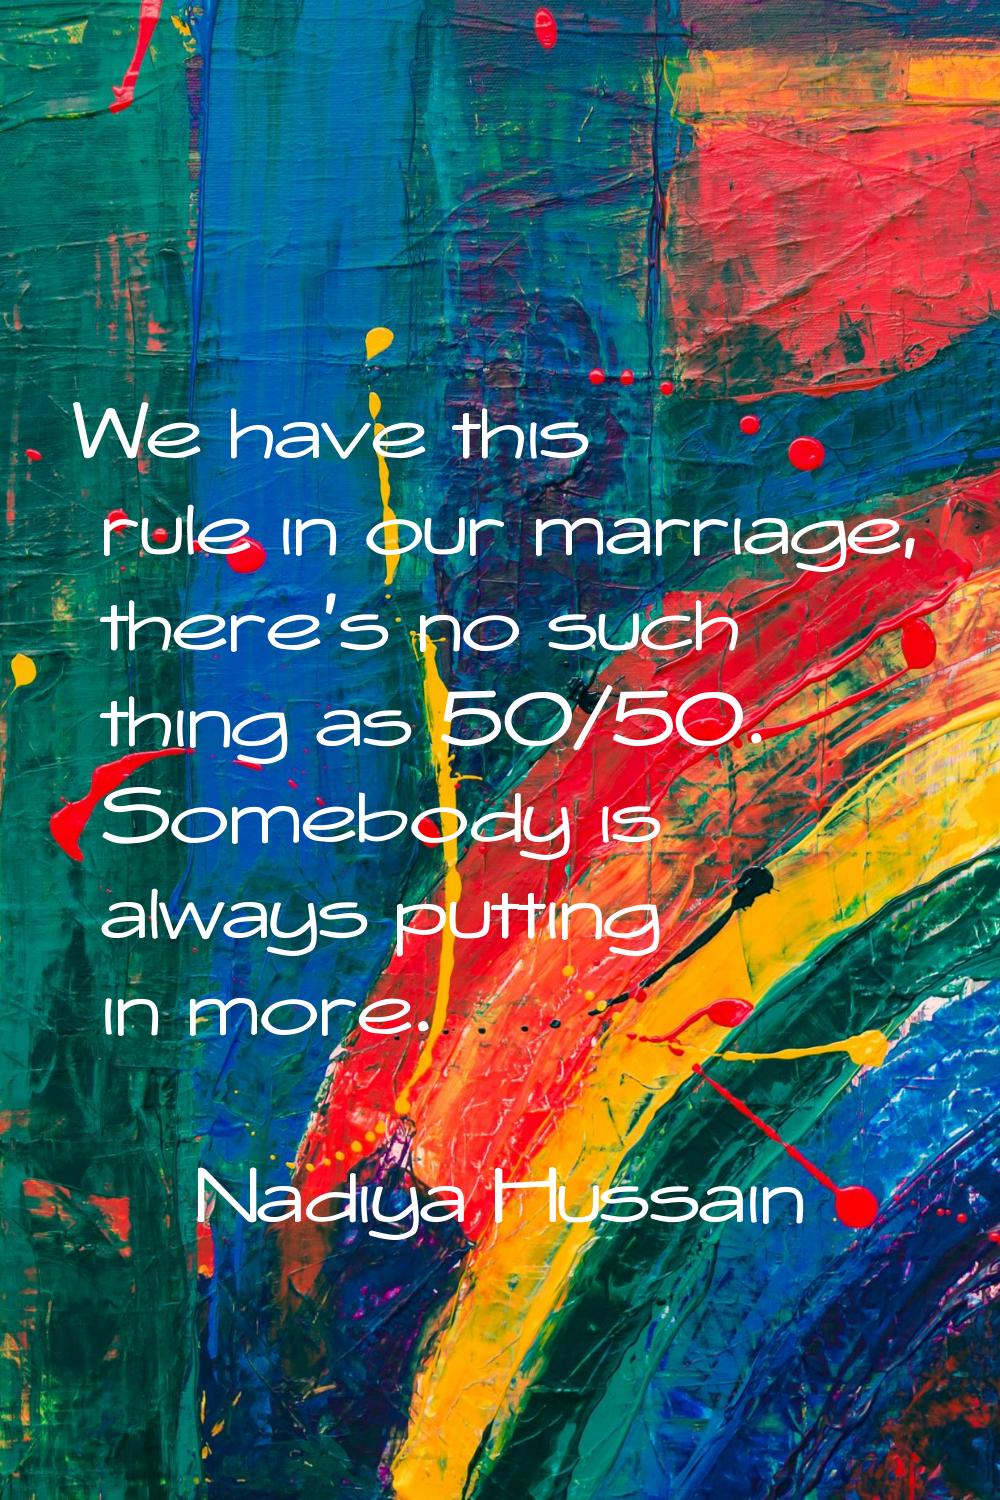 We have this rule in our marriage, there's no such thing as 50/50. Somebody is always putting in mo